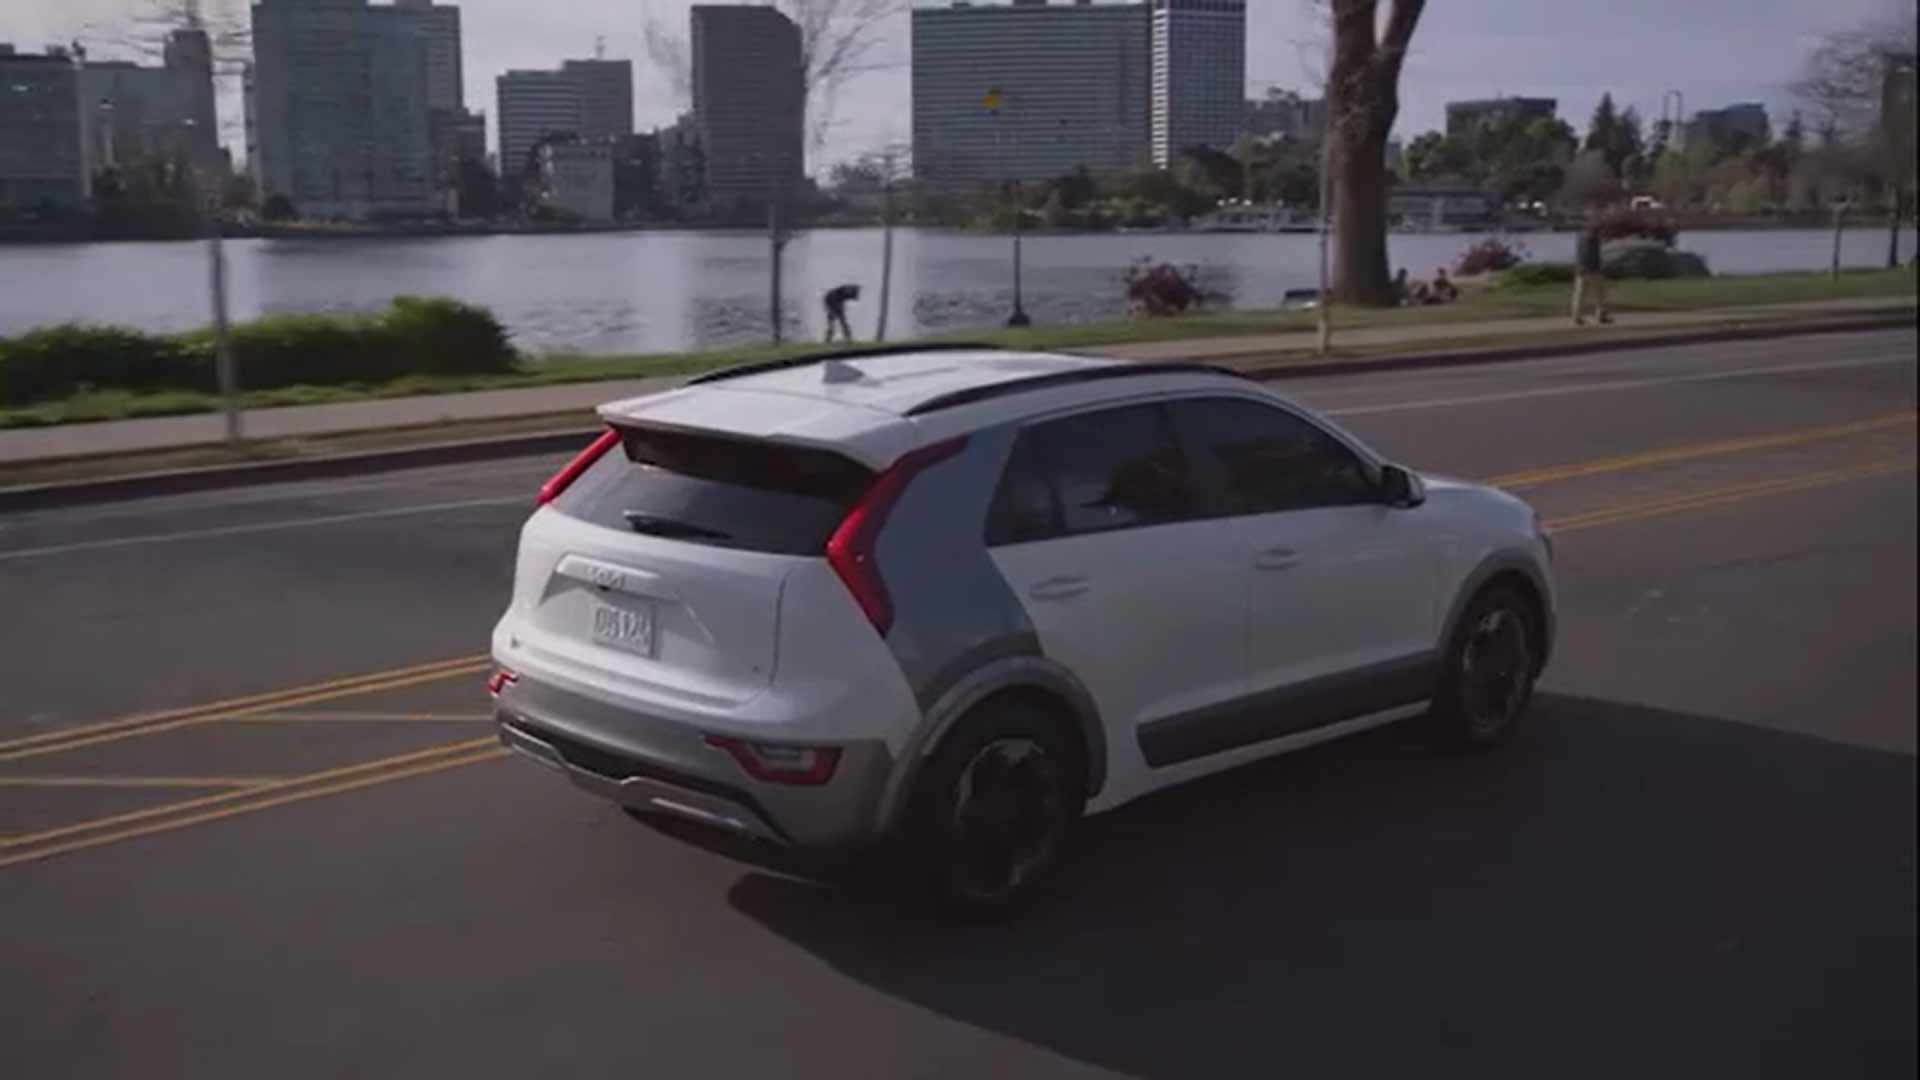 Designed for a sustainable future, the all-new 2023 Kia Niro debuts at the New York International Auto Show in three variants – hybrid (HEV), plug-in hybrid (PHEV) and all-electric (EV).